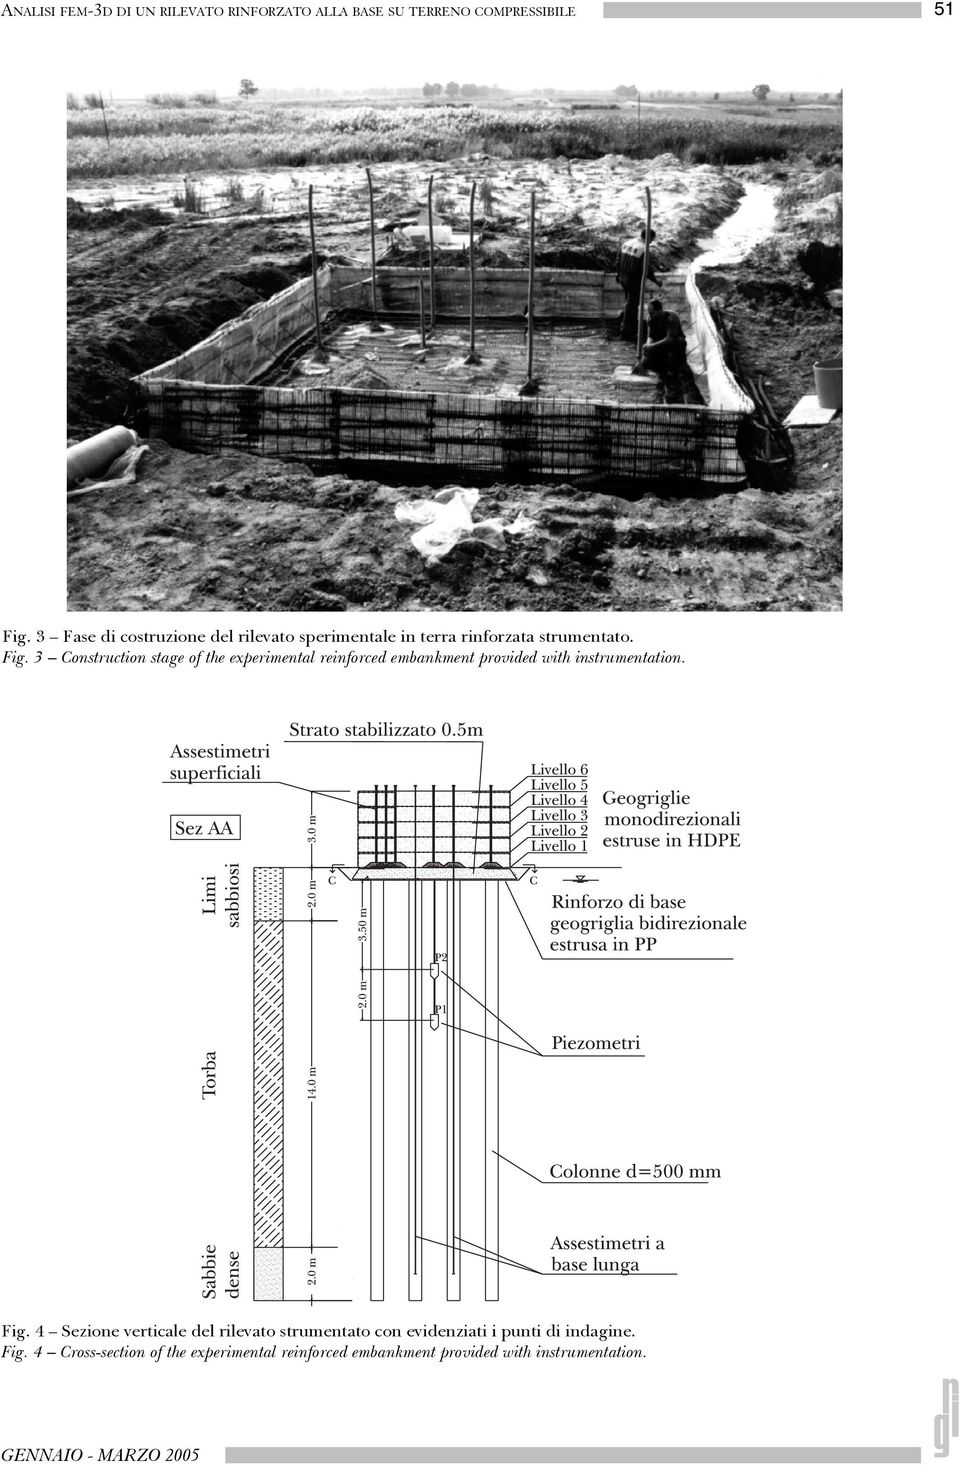 3 Construction stage of the experimental reinforced embankment provided with instrumentation. Fig.